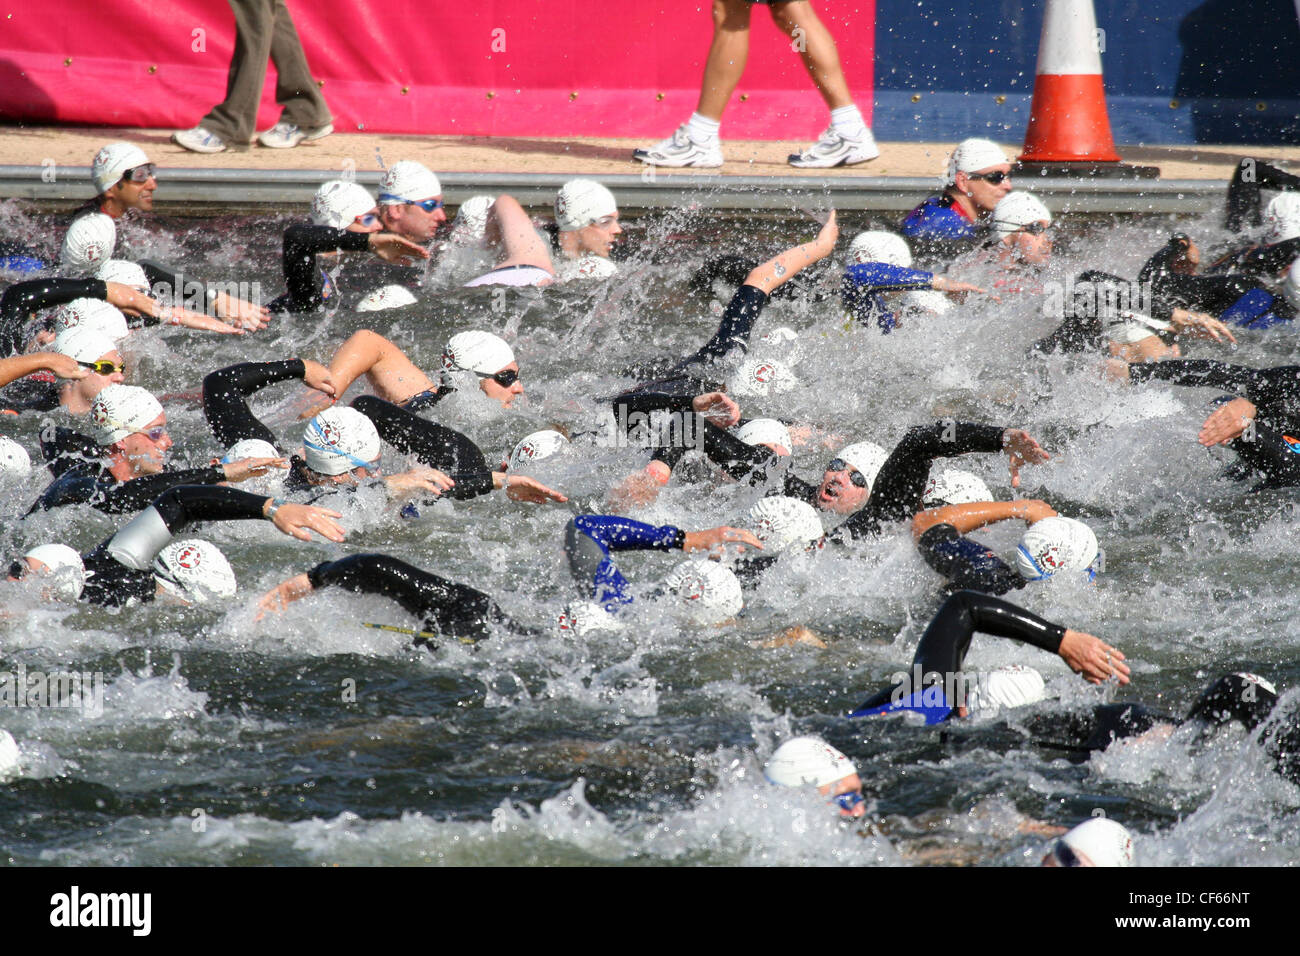 Athletes competing in the Salford Triathlon. Stock Photo